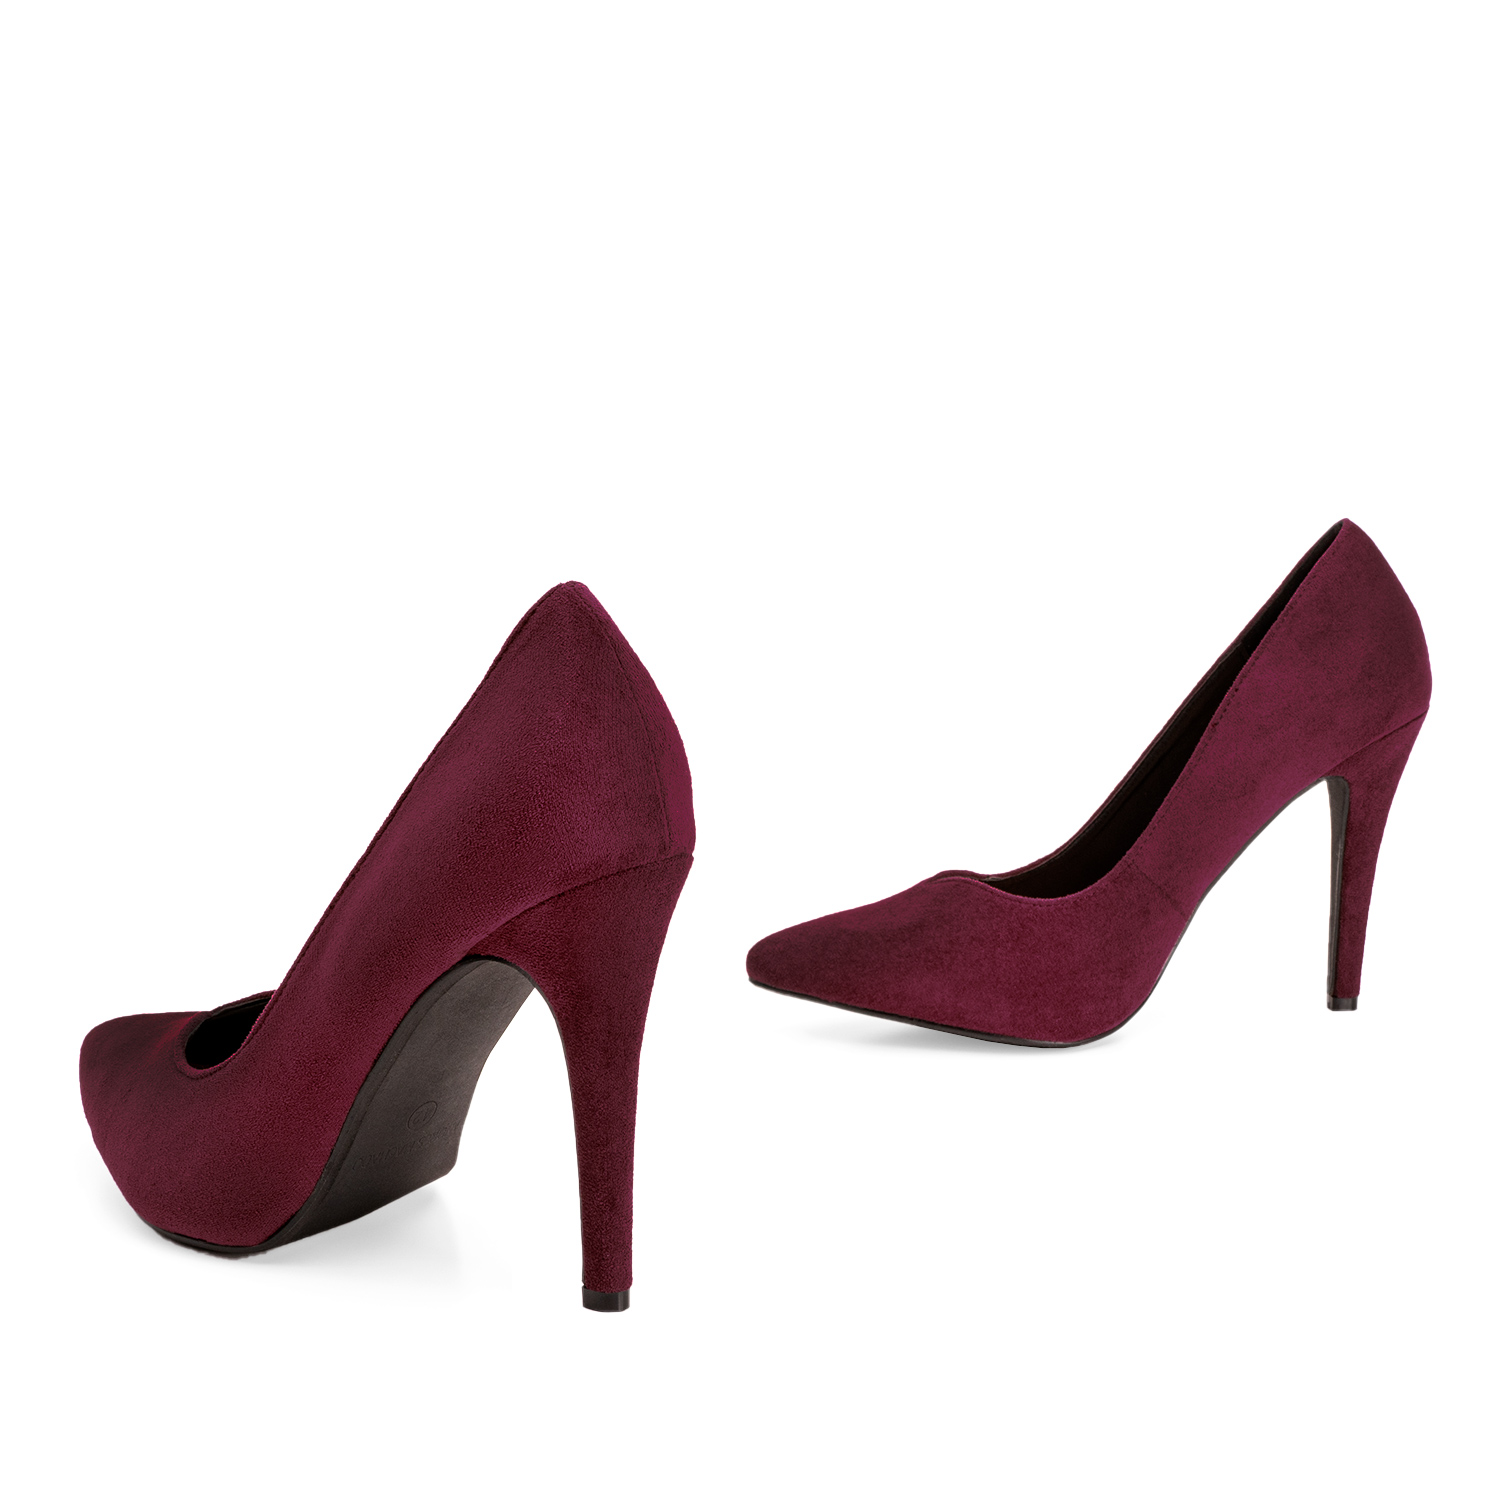 Heeled shoes in bordeaux faux suede 